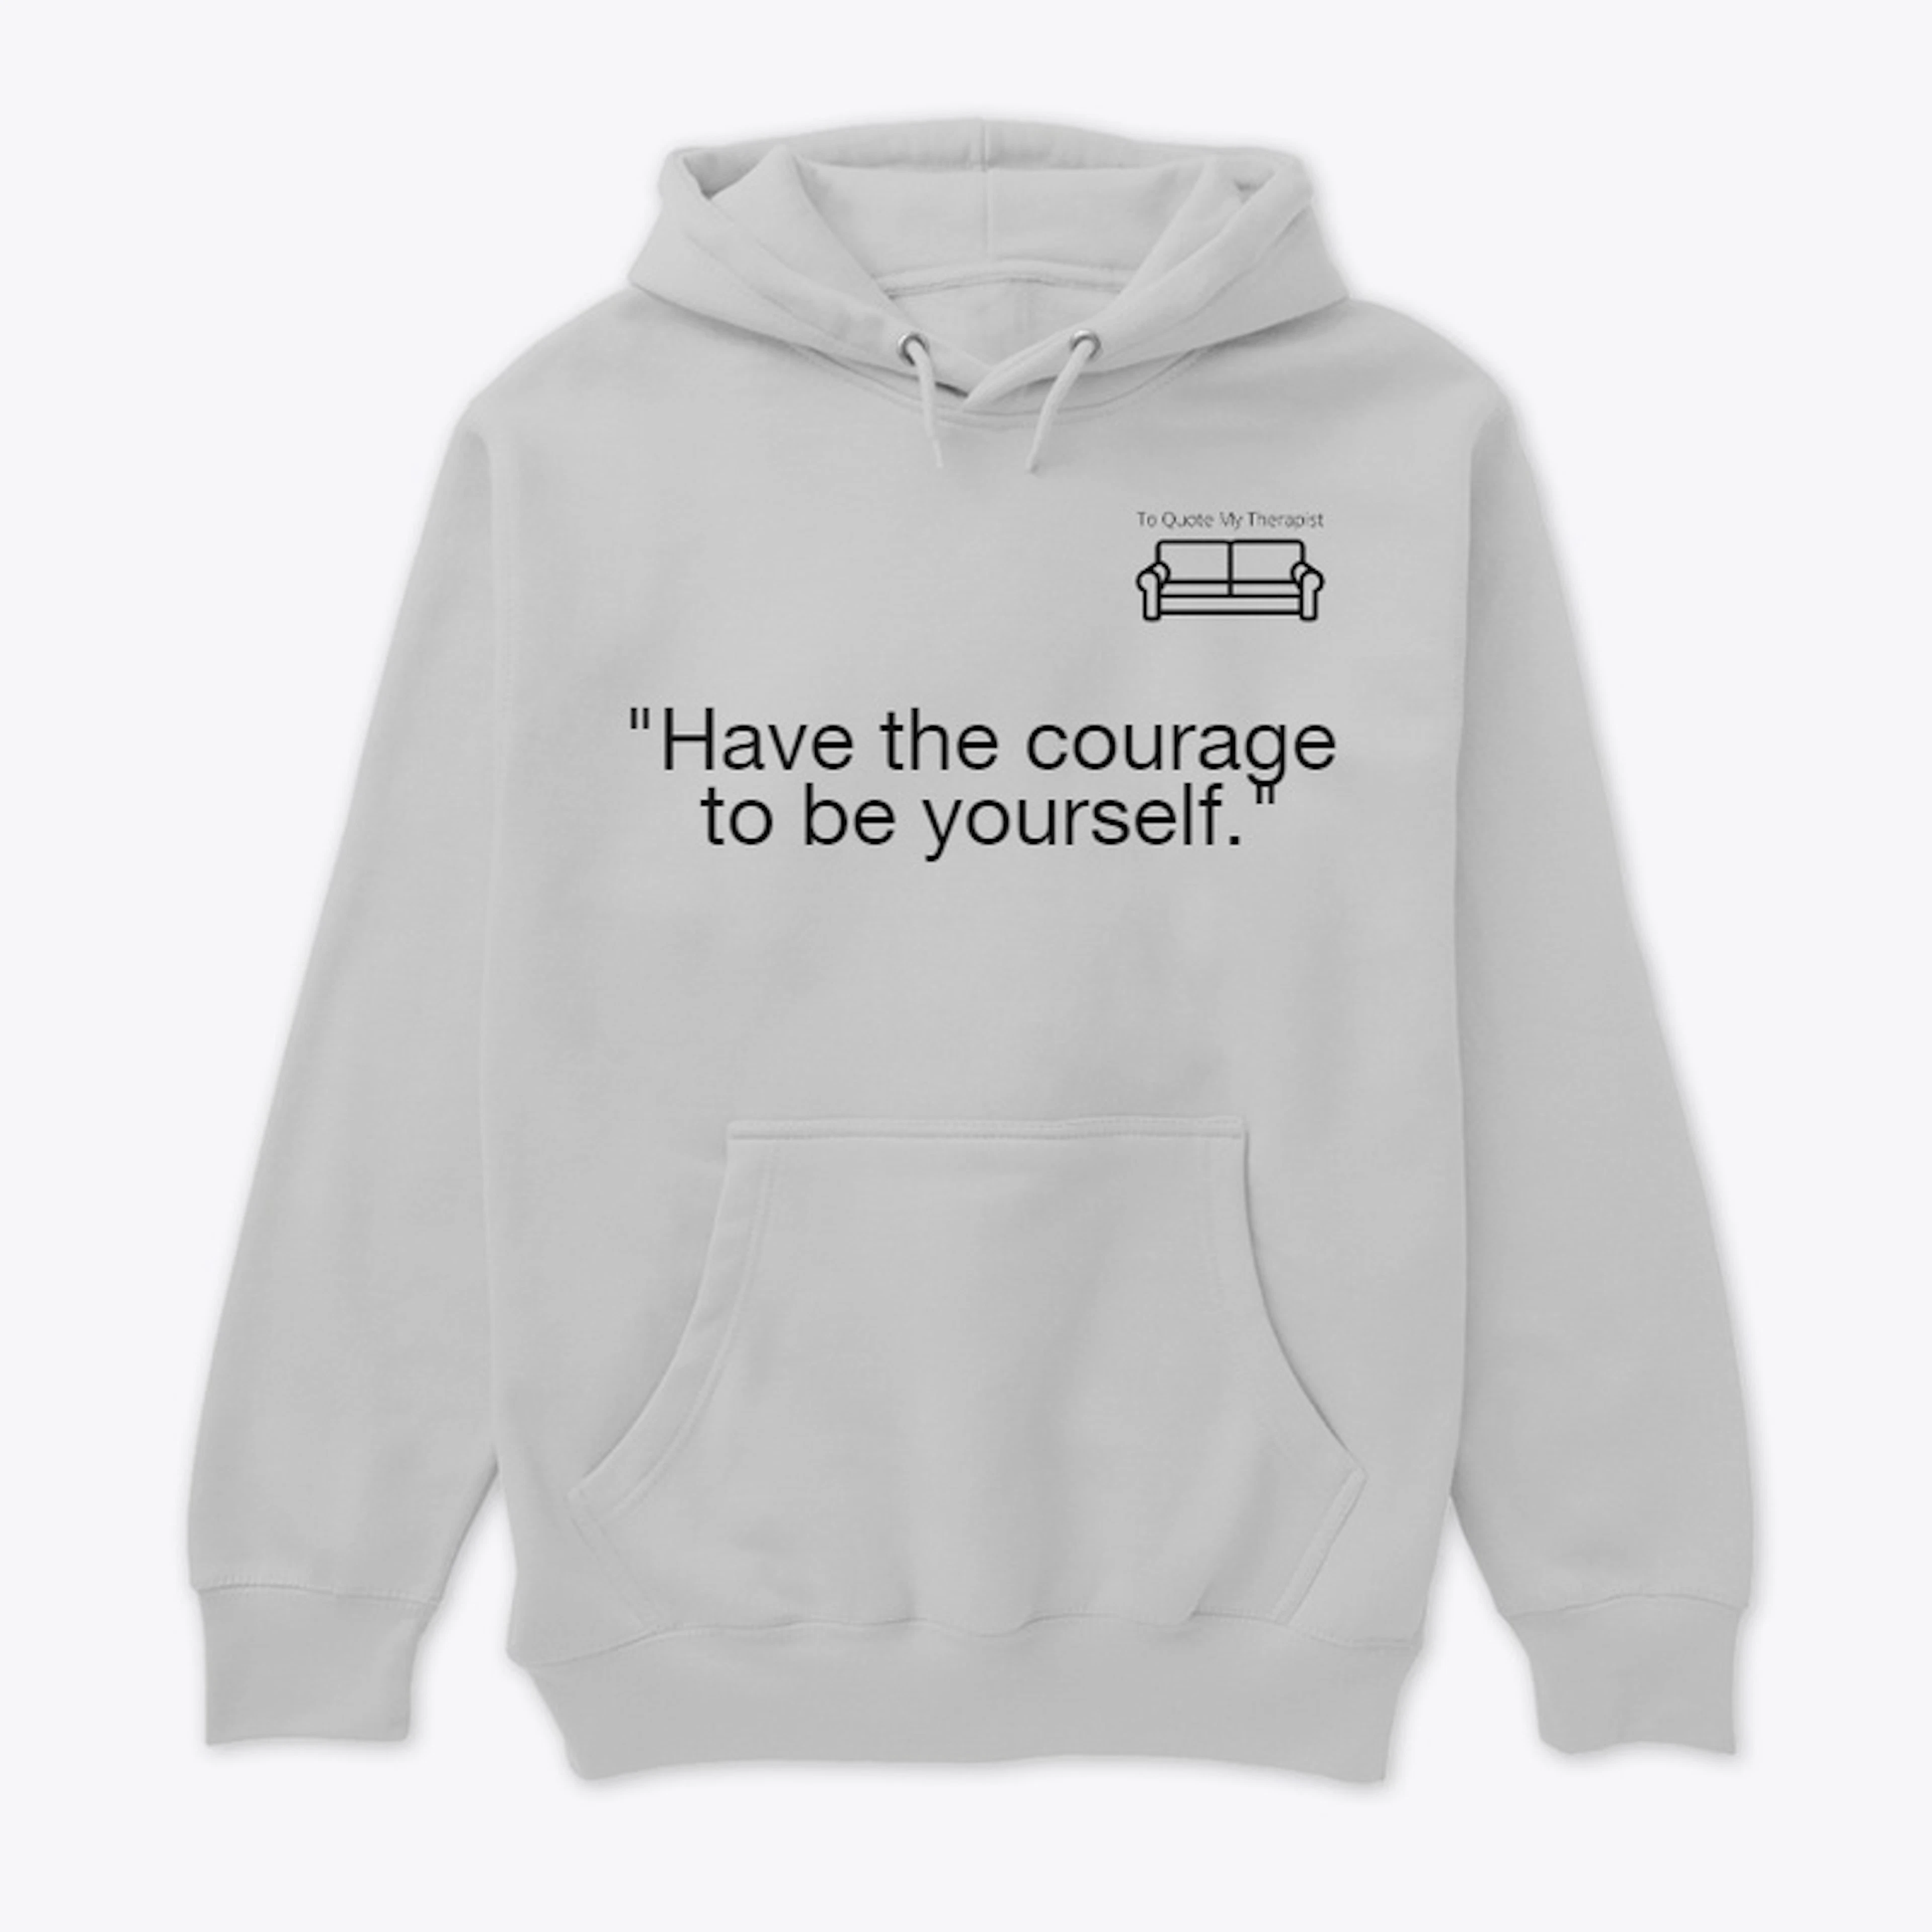 TQMT-"Have the courage to be yourself."